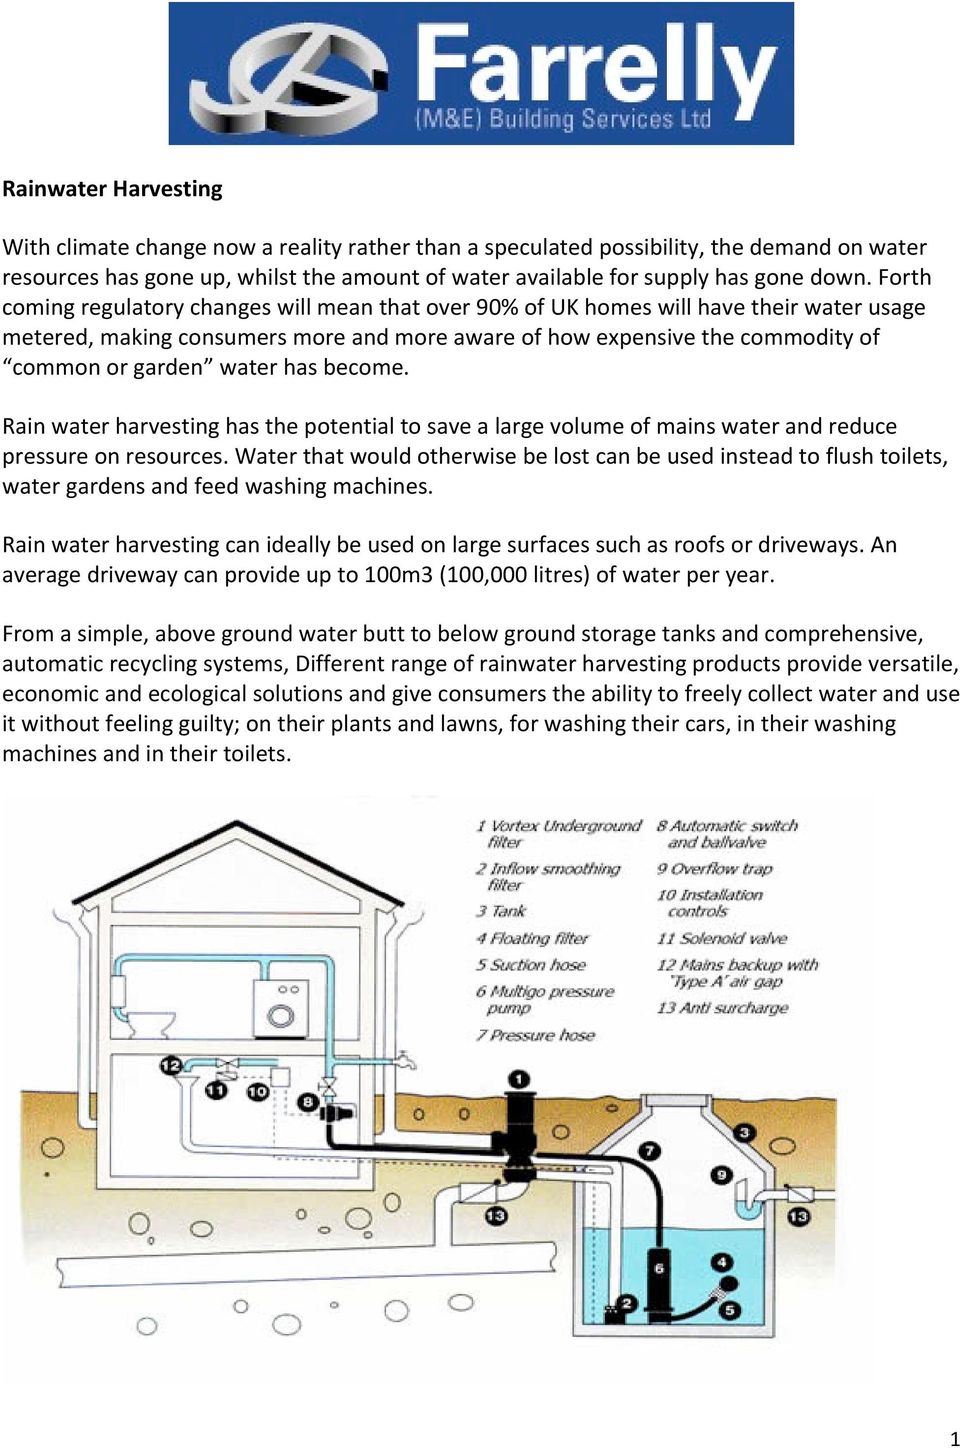 has become. Rain water harvesting has the potential to save a large volume of mains water and reduce pressure on resources.